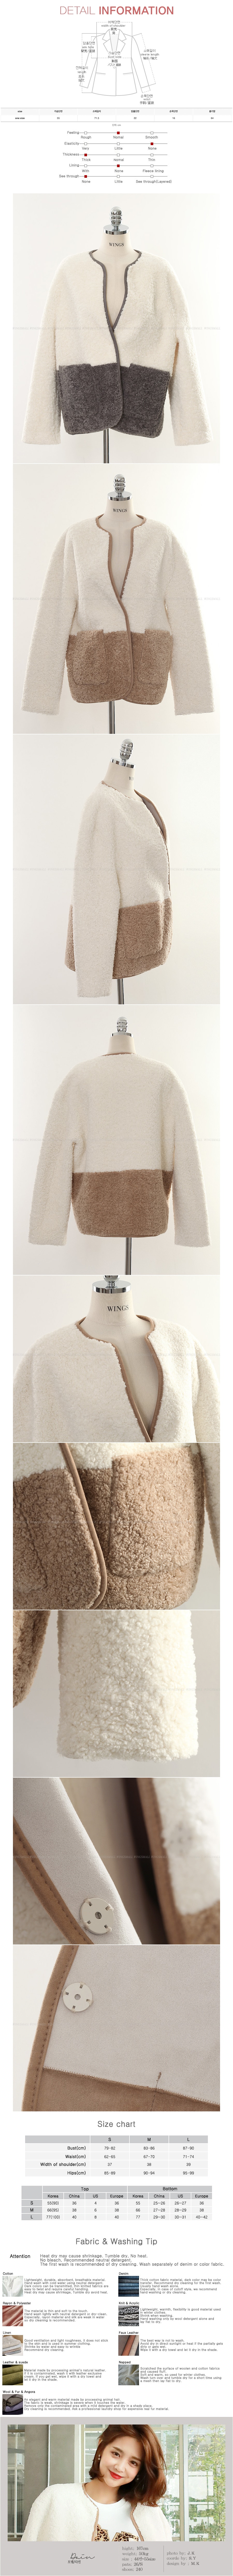 WINGS Collarless Color-Block Faux Shearling Jacket #Beige One Size(S-M)